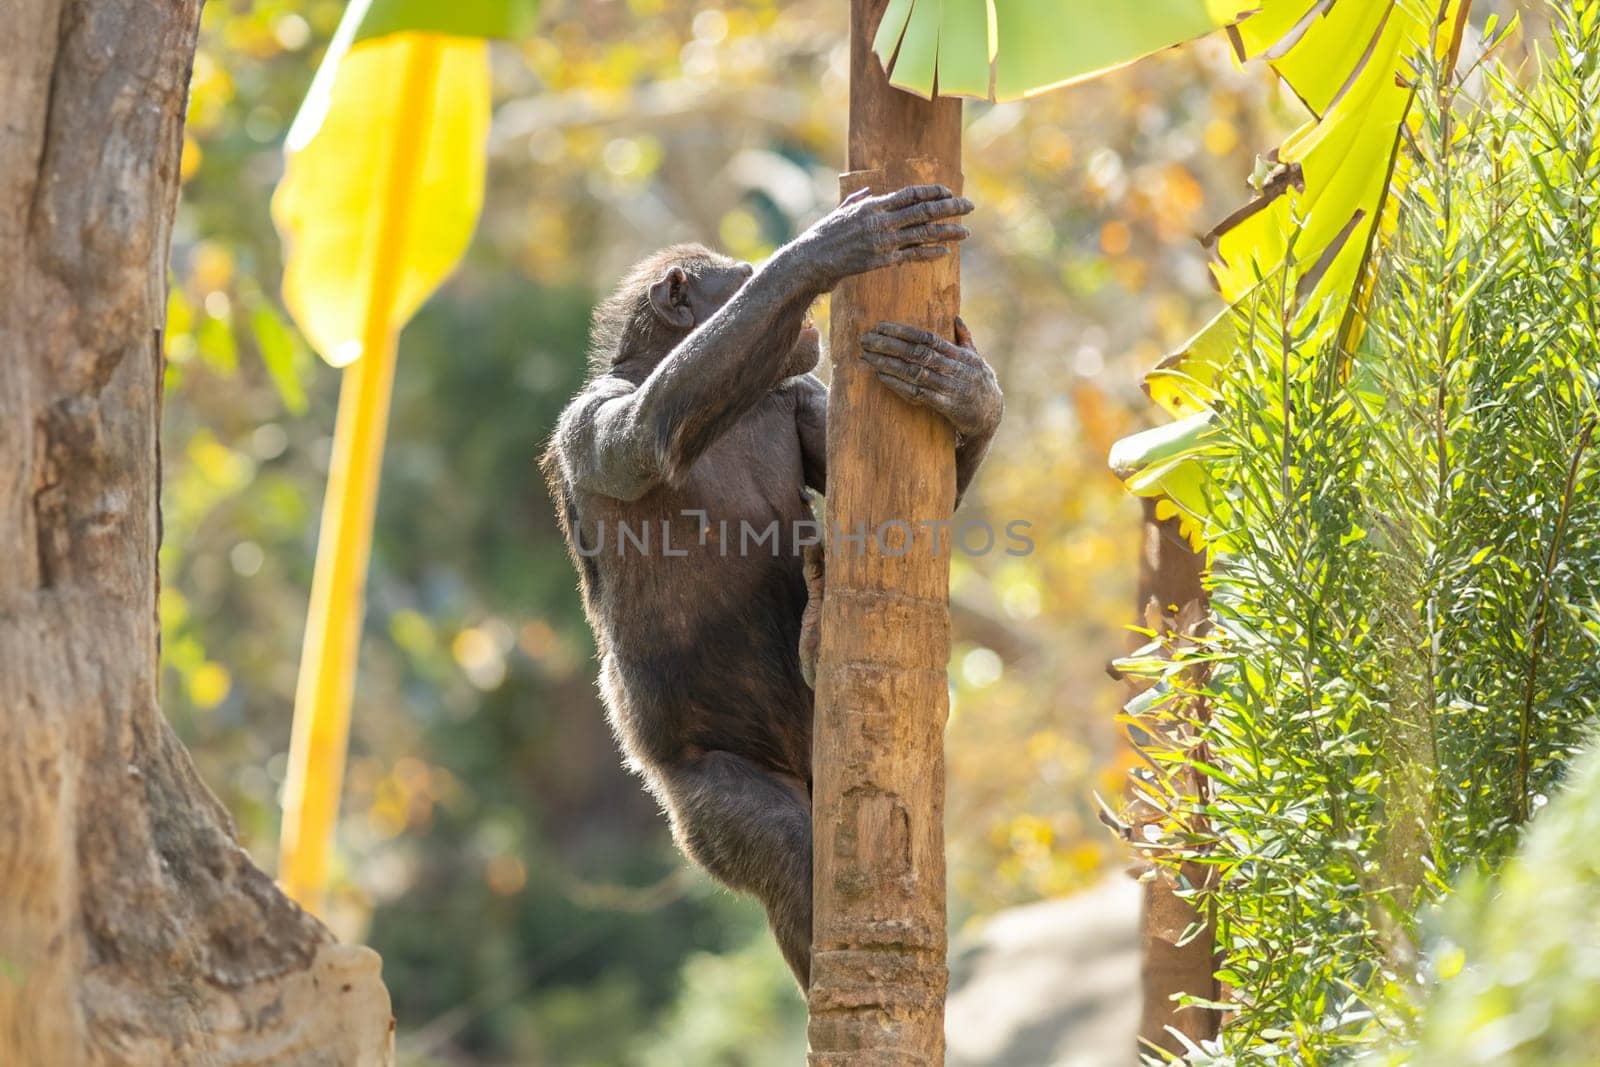 A monkey climbing up the side of a tree